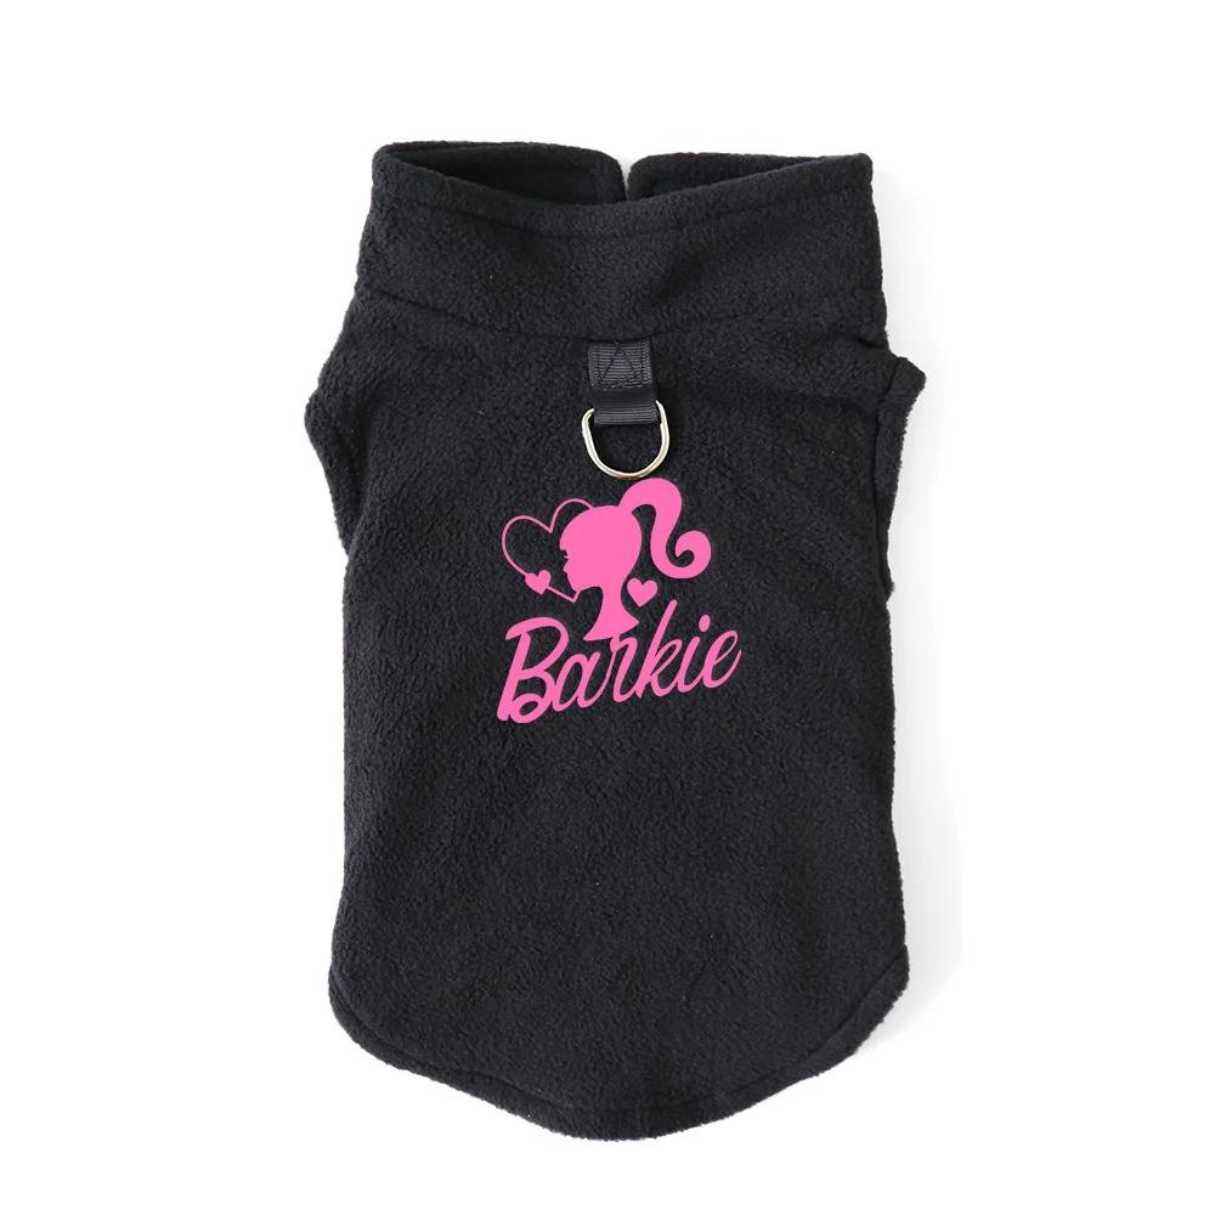 Barkie Doll dog vest, jacket, clothes Black with pink writing on it with barbie. 